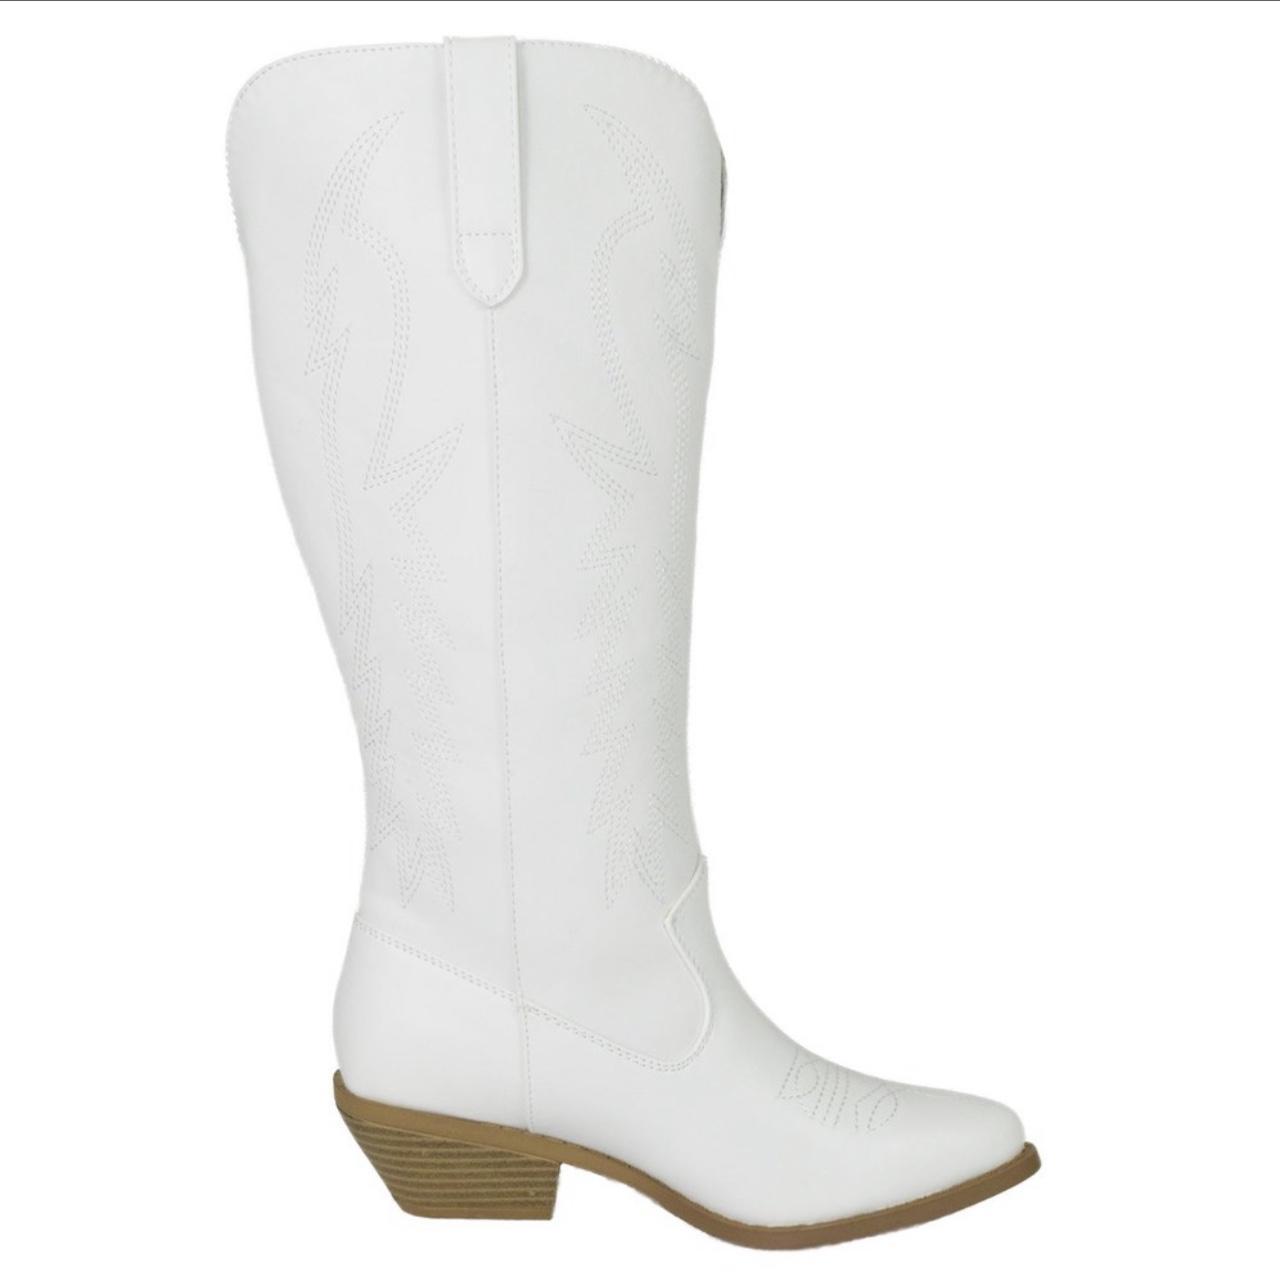 Princess Polly Women's White and Cream Boots | Depop